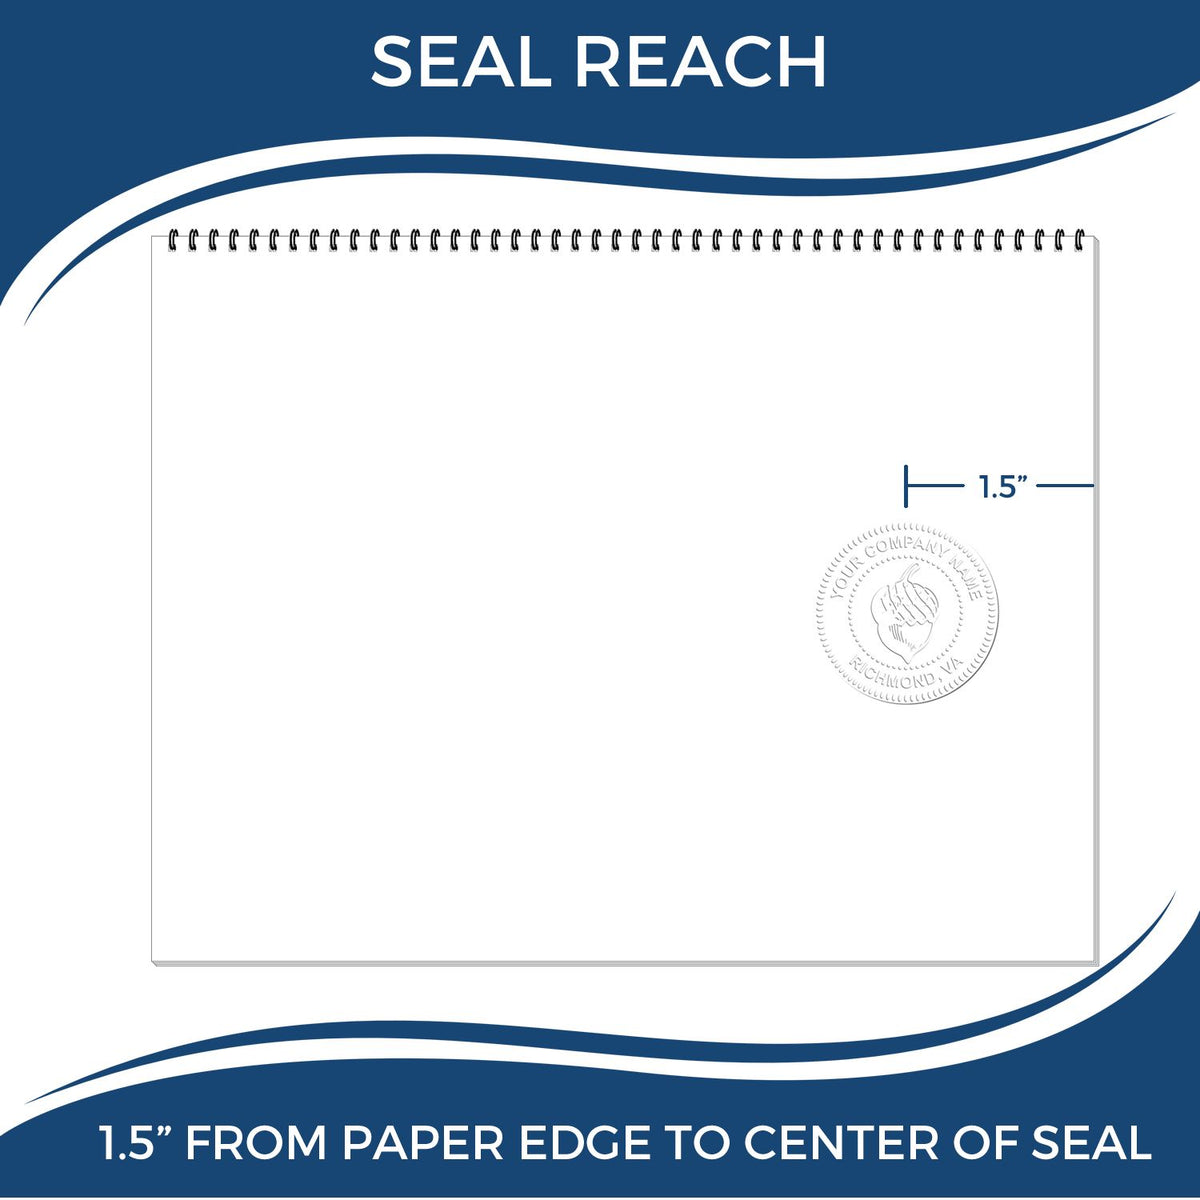 An infographic showing the seal reach which is represented by a ruler and a miniature seal image of the Gift Illinois Landscape Architect Seal